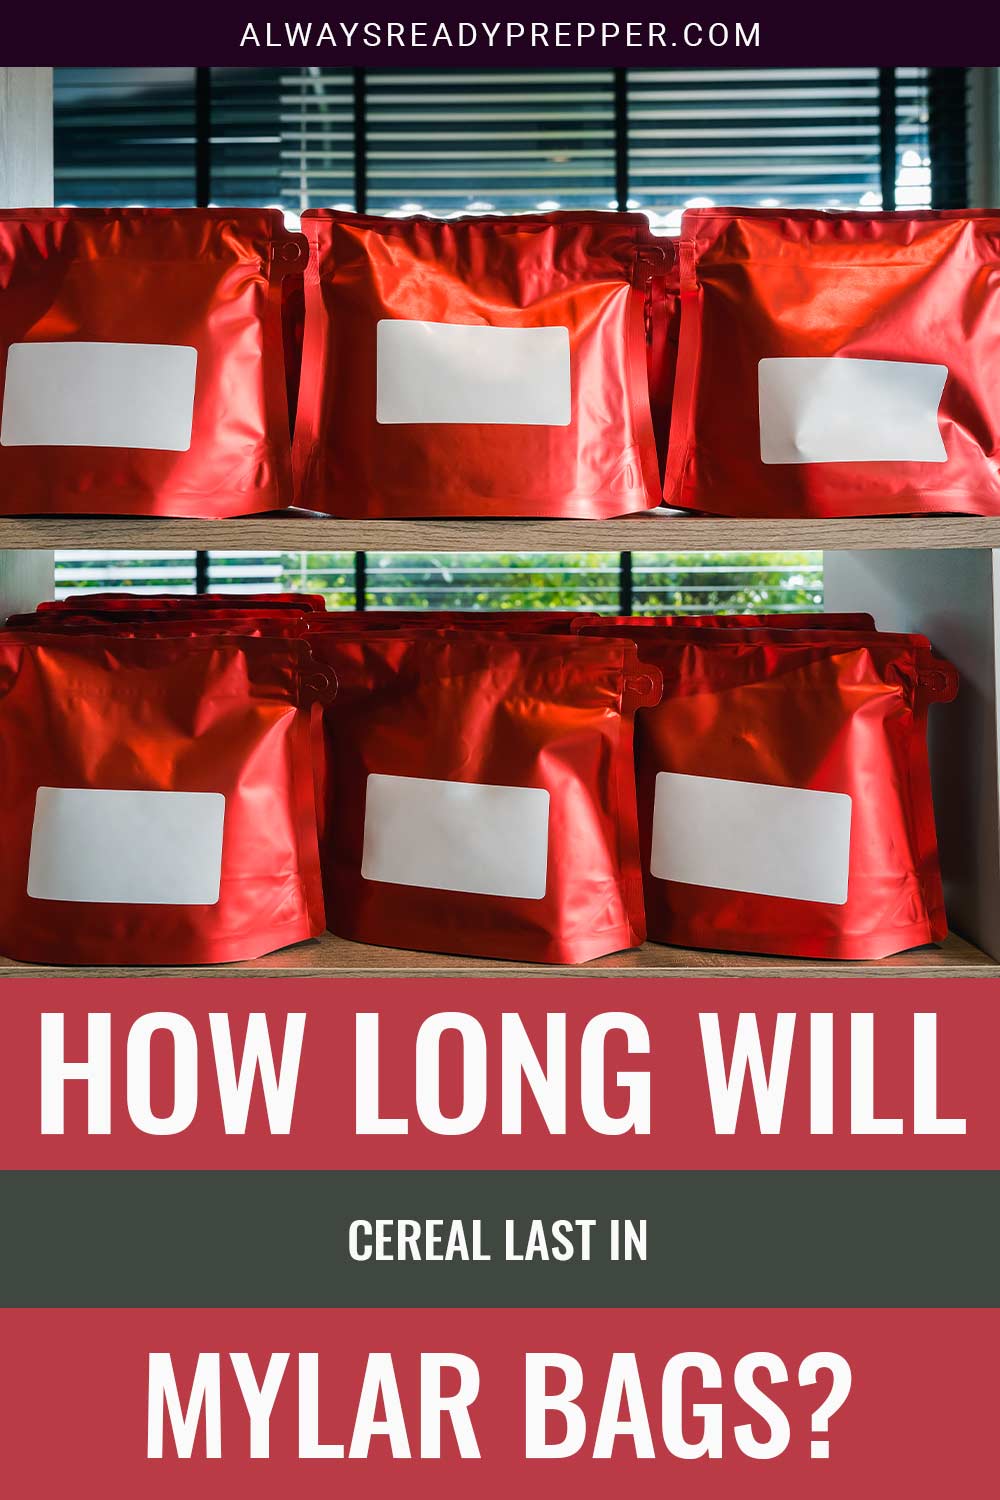 Red Mylar bags stacked on a shelf - How Long Will Cereal Last In Mylar Bags?